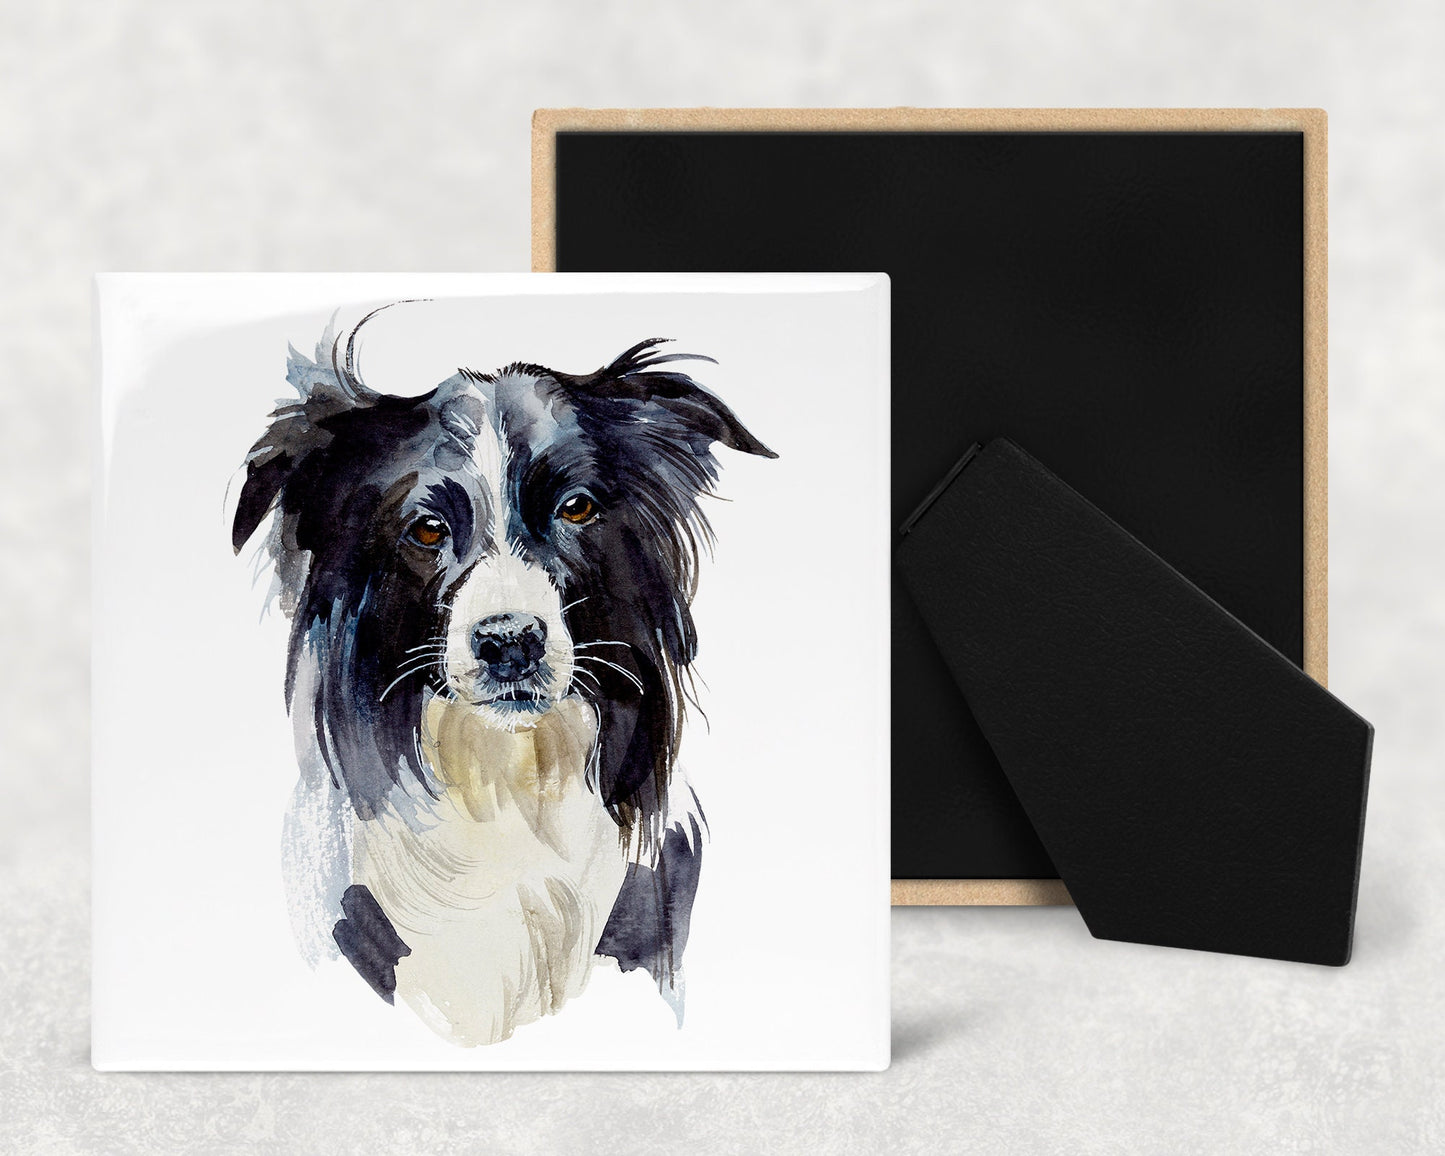 Border Collie Art Decorative Ceramic Tile with Optional Easel Back - Available in 3 Sizes